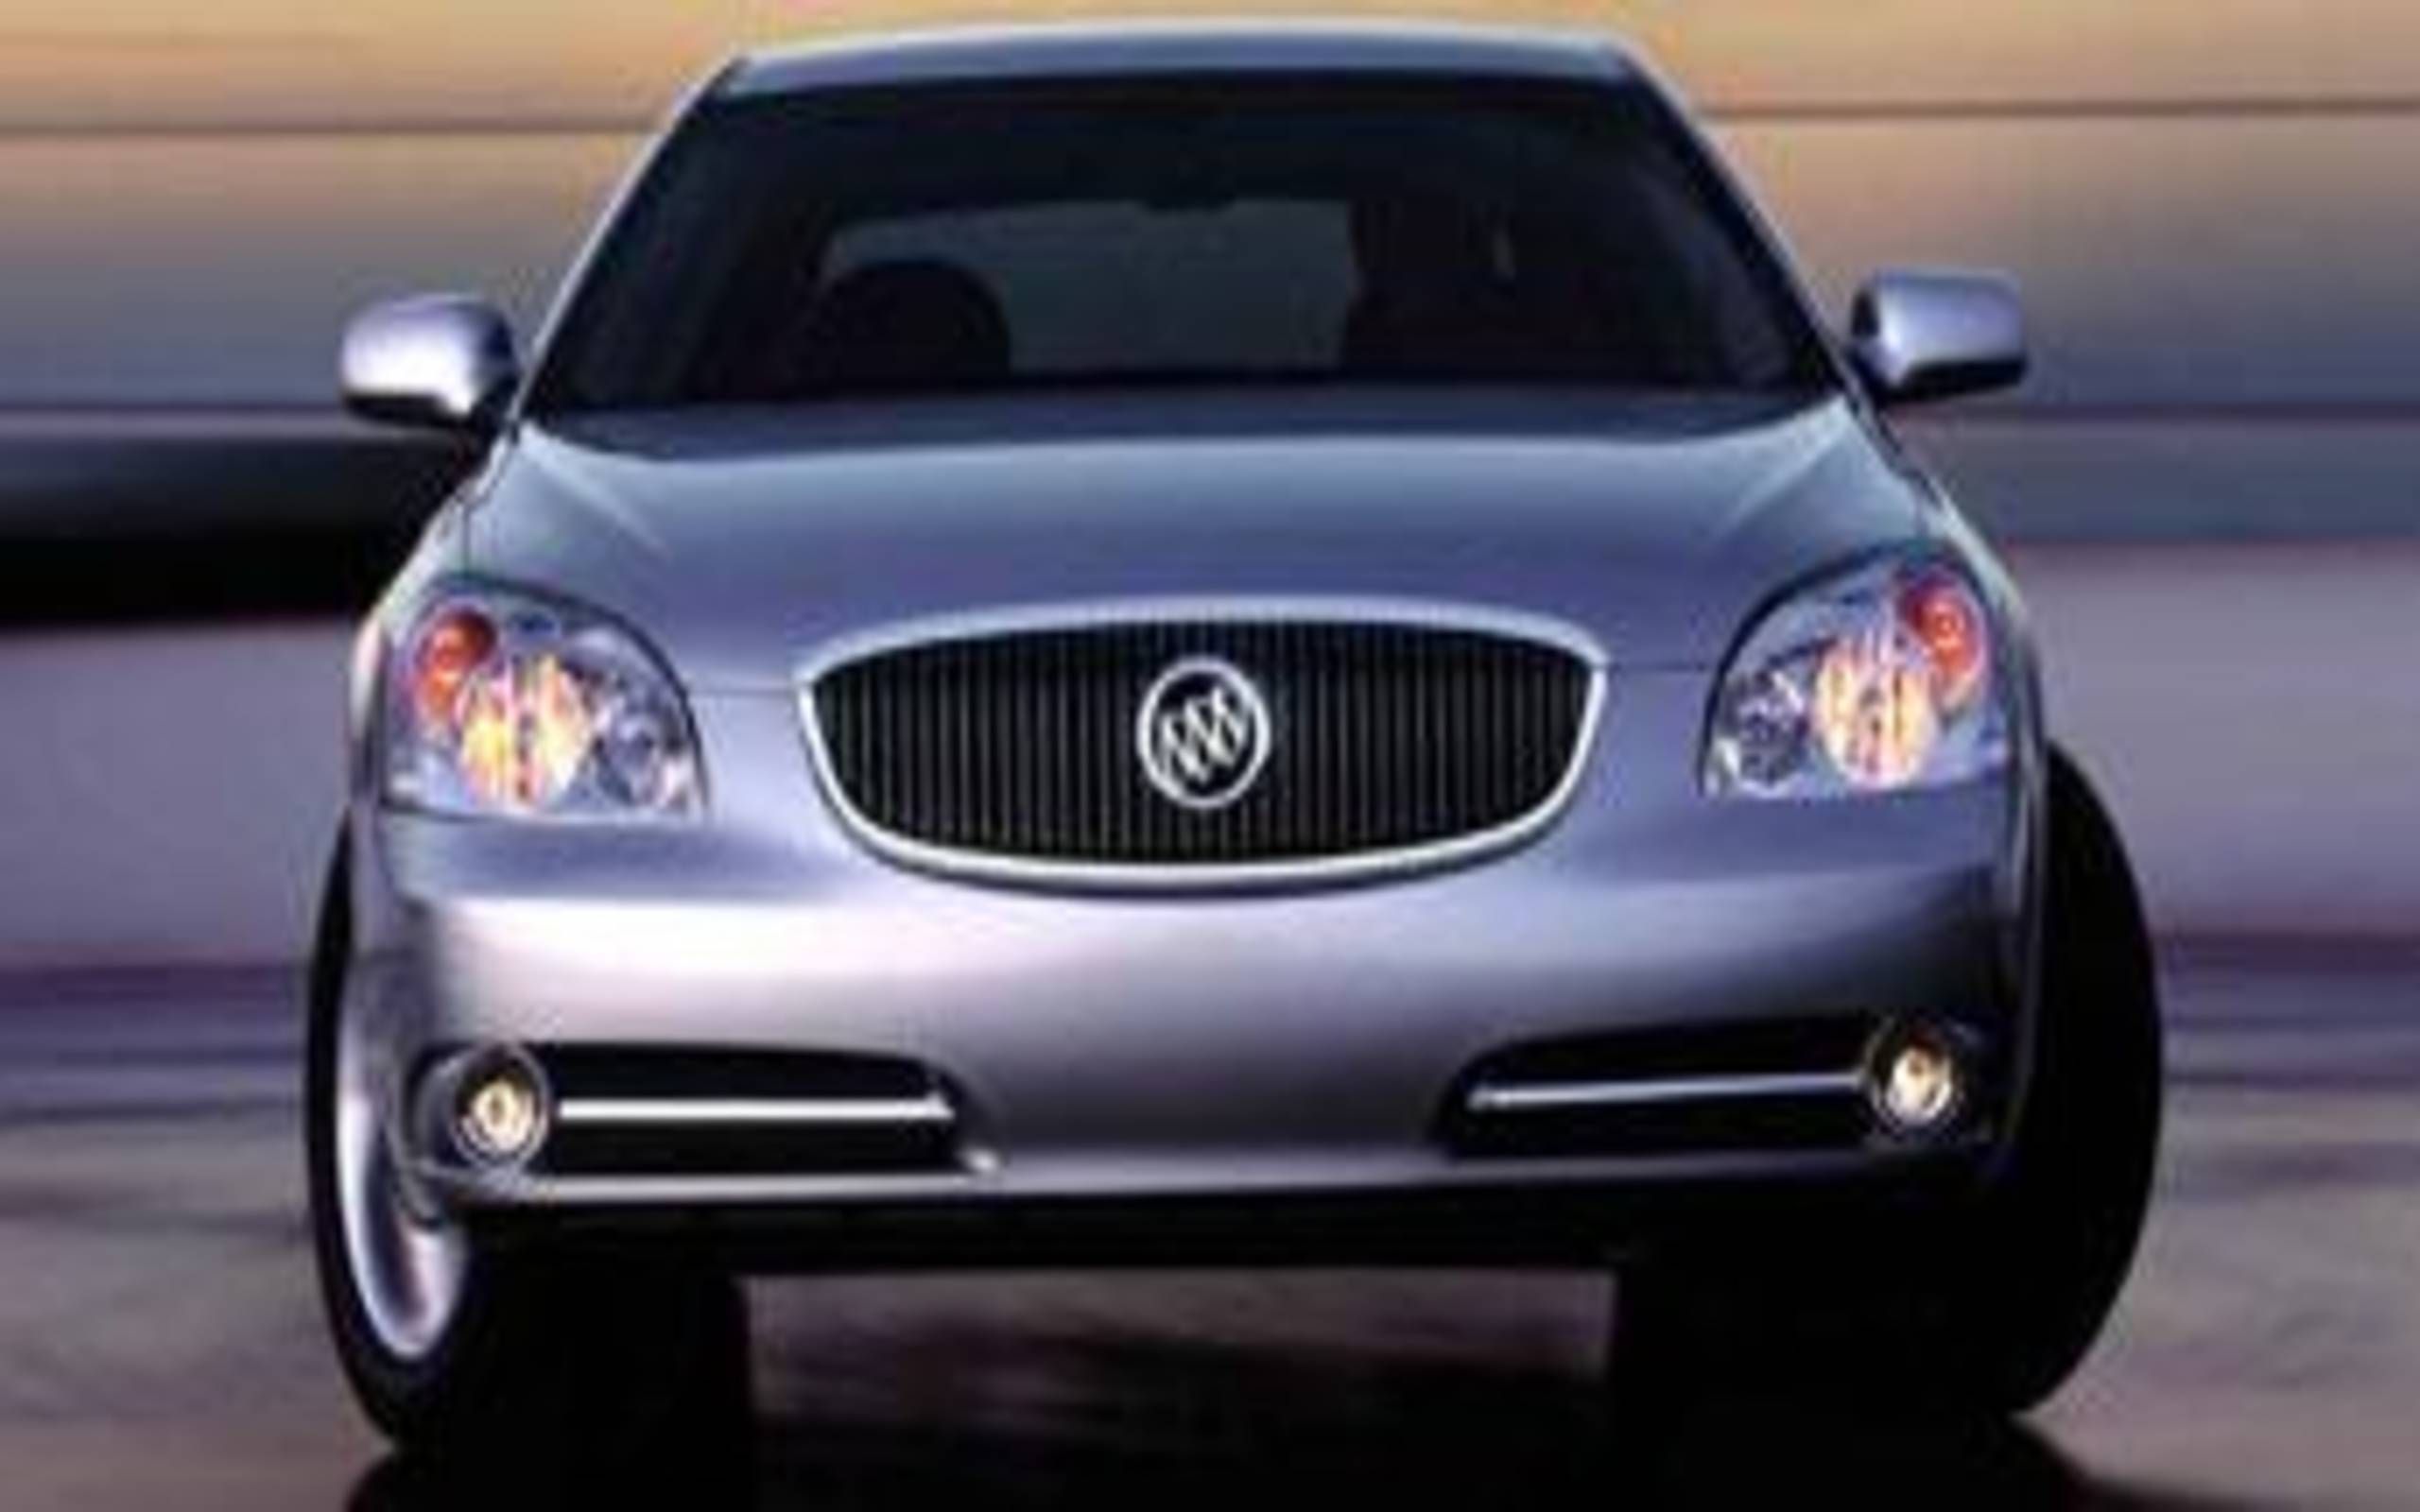 2006 Buick Lucerne: More than just a better Buick